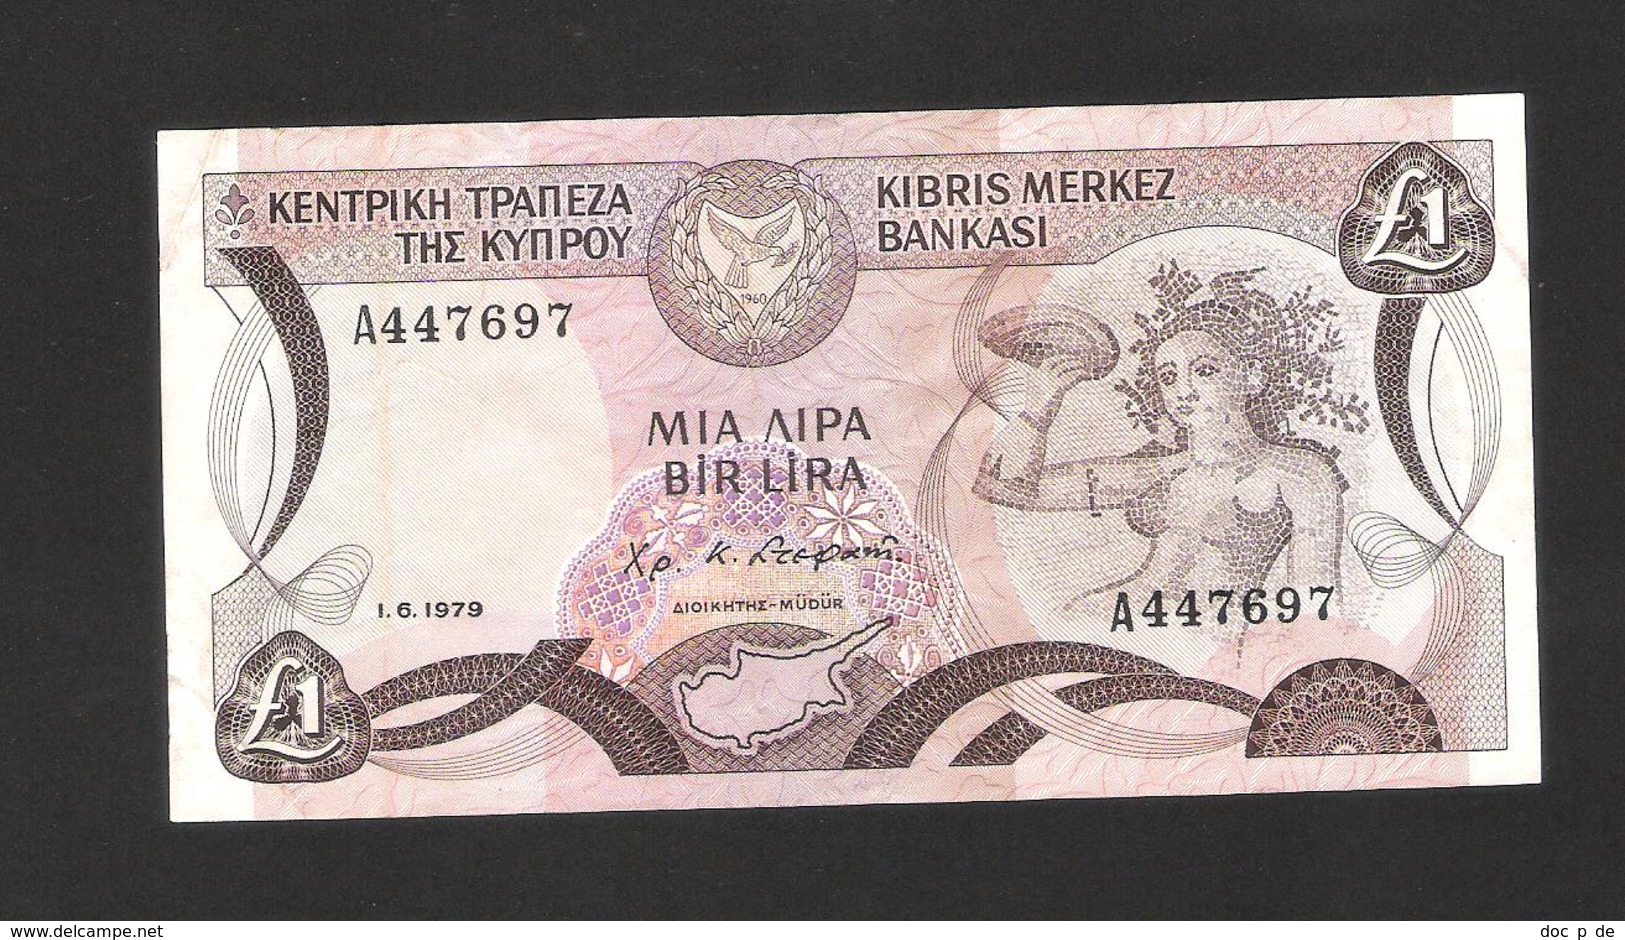 Zypern - Cyprus - Chypre - 1 Pounds - 1.6.1979 - Good Used Condition - Cyprus